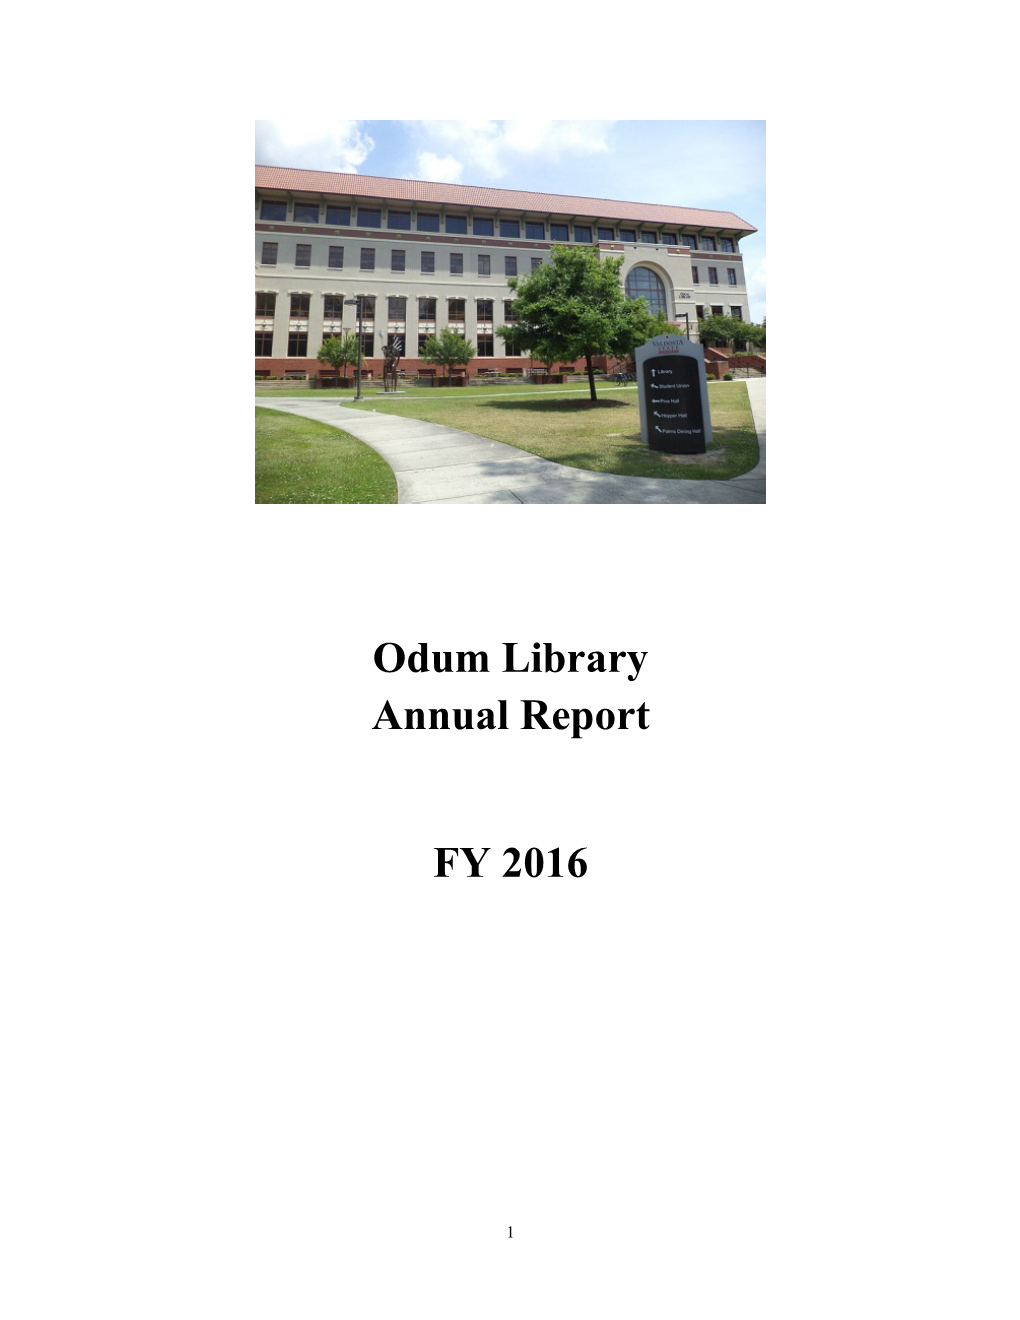 Odum Library Annual Report FY 2016